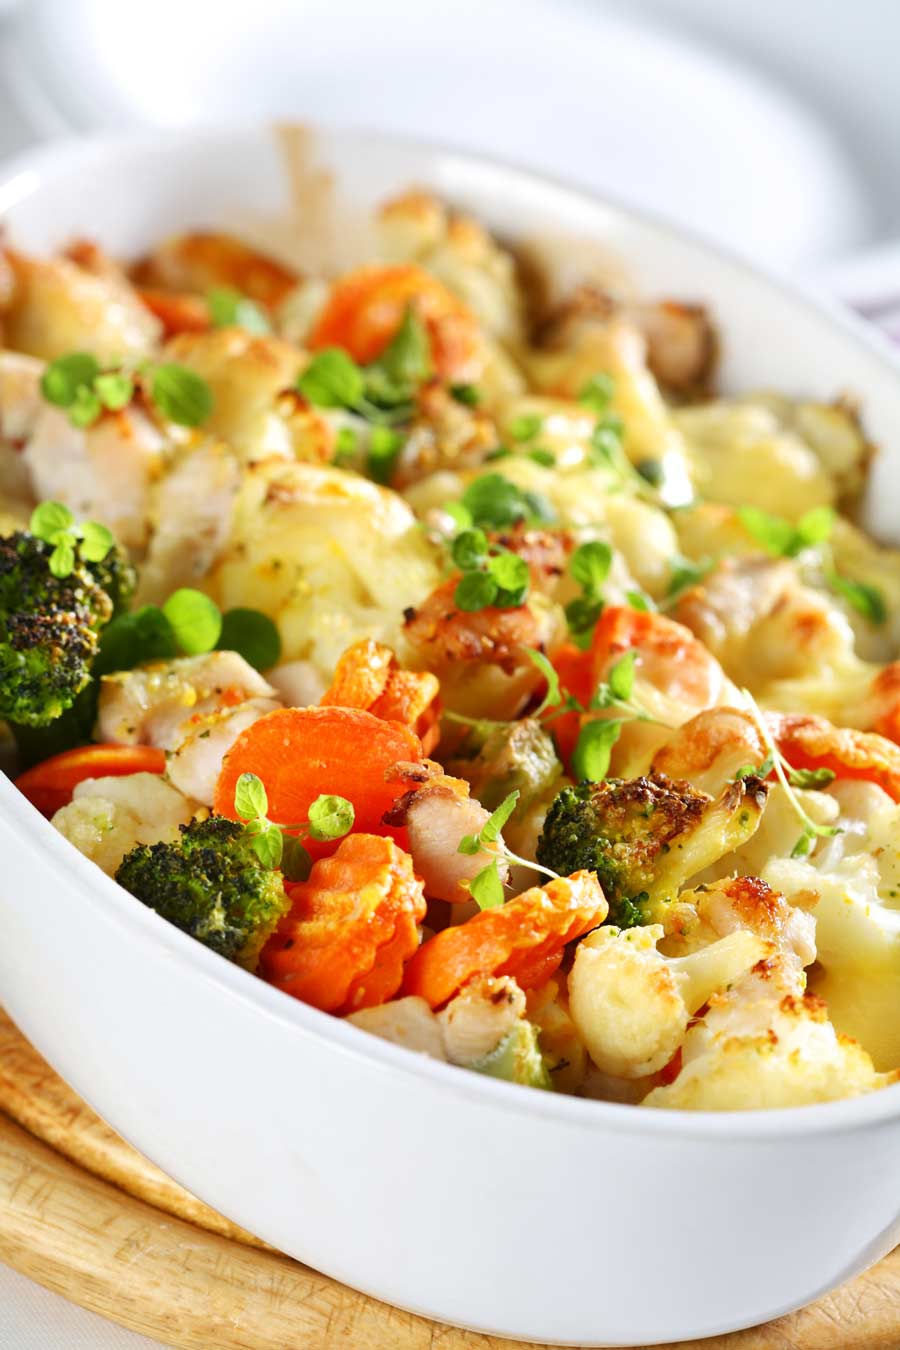 A medley of baked mixed vegetables such as carrots, broccoli and cauliflower with cheese